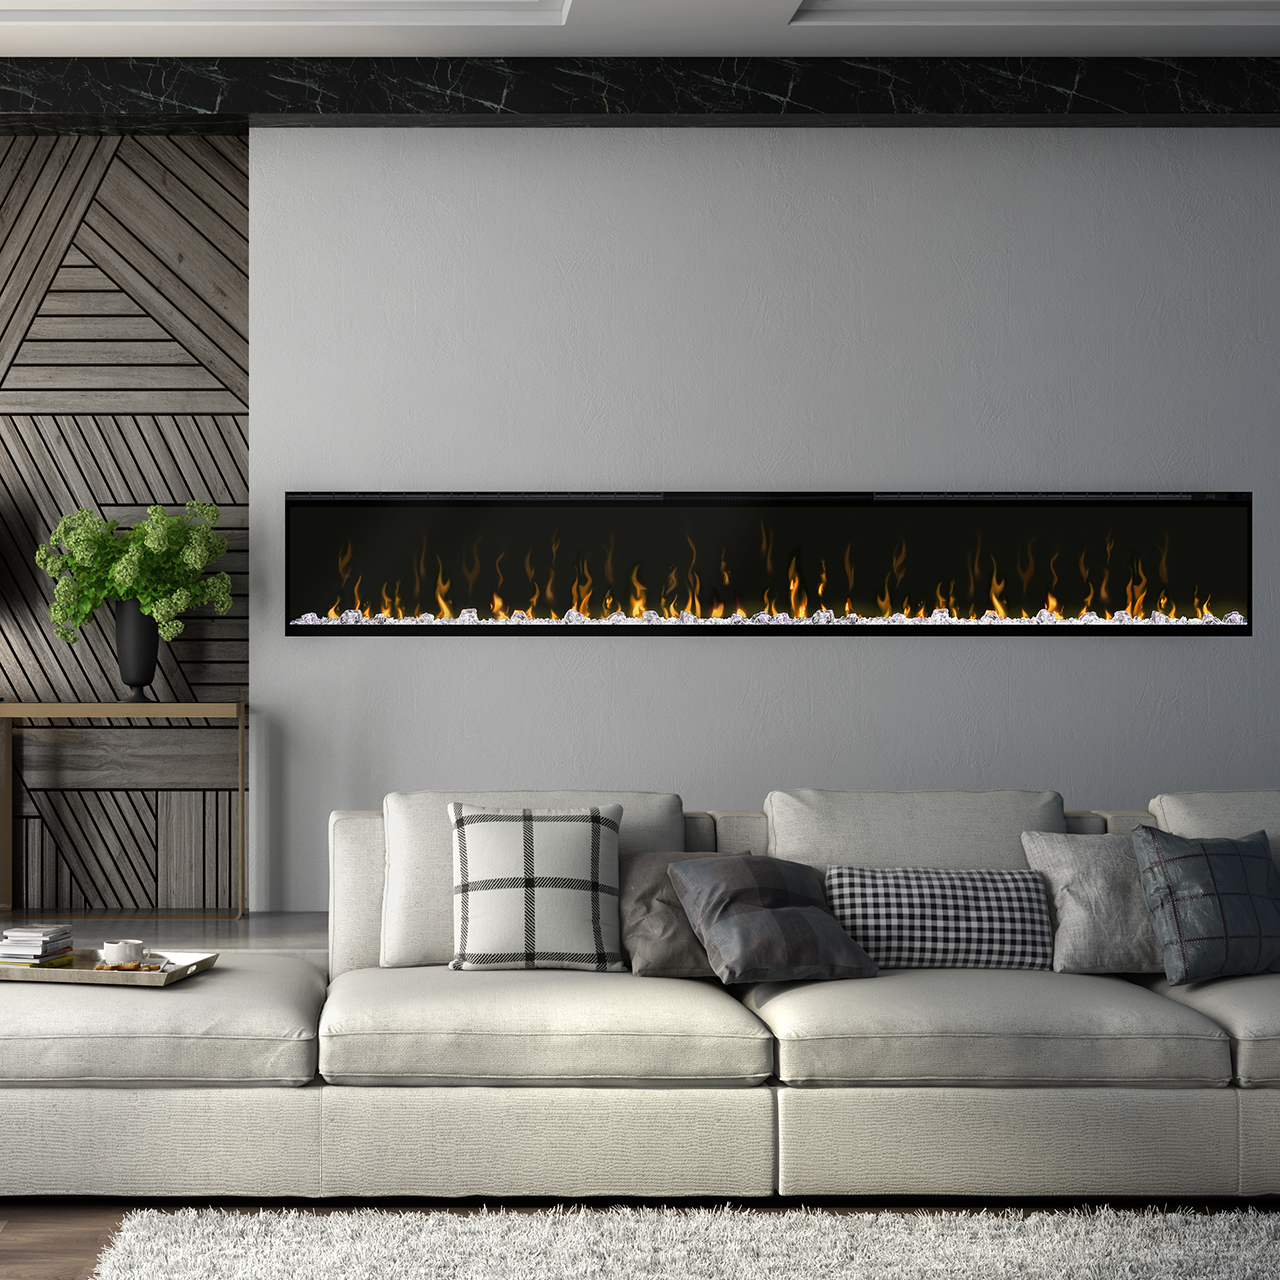 In wall mounted electric fireplaces